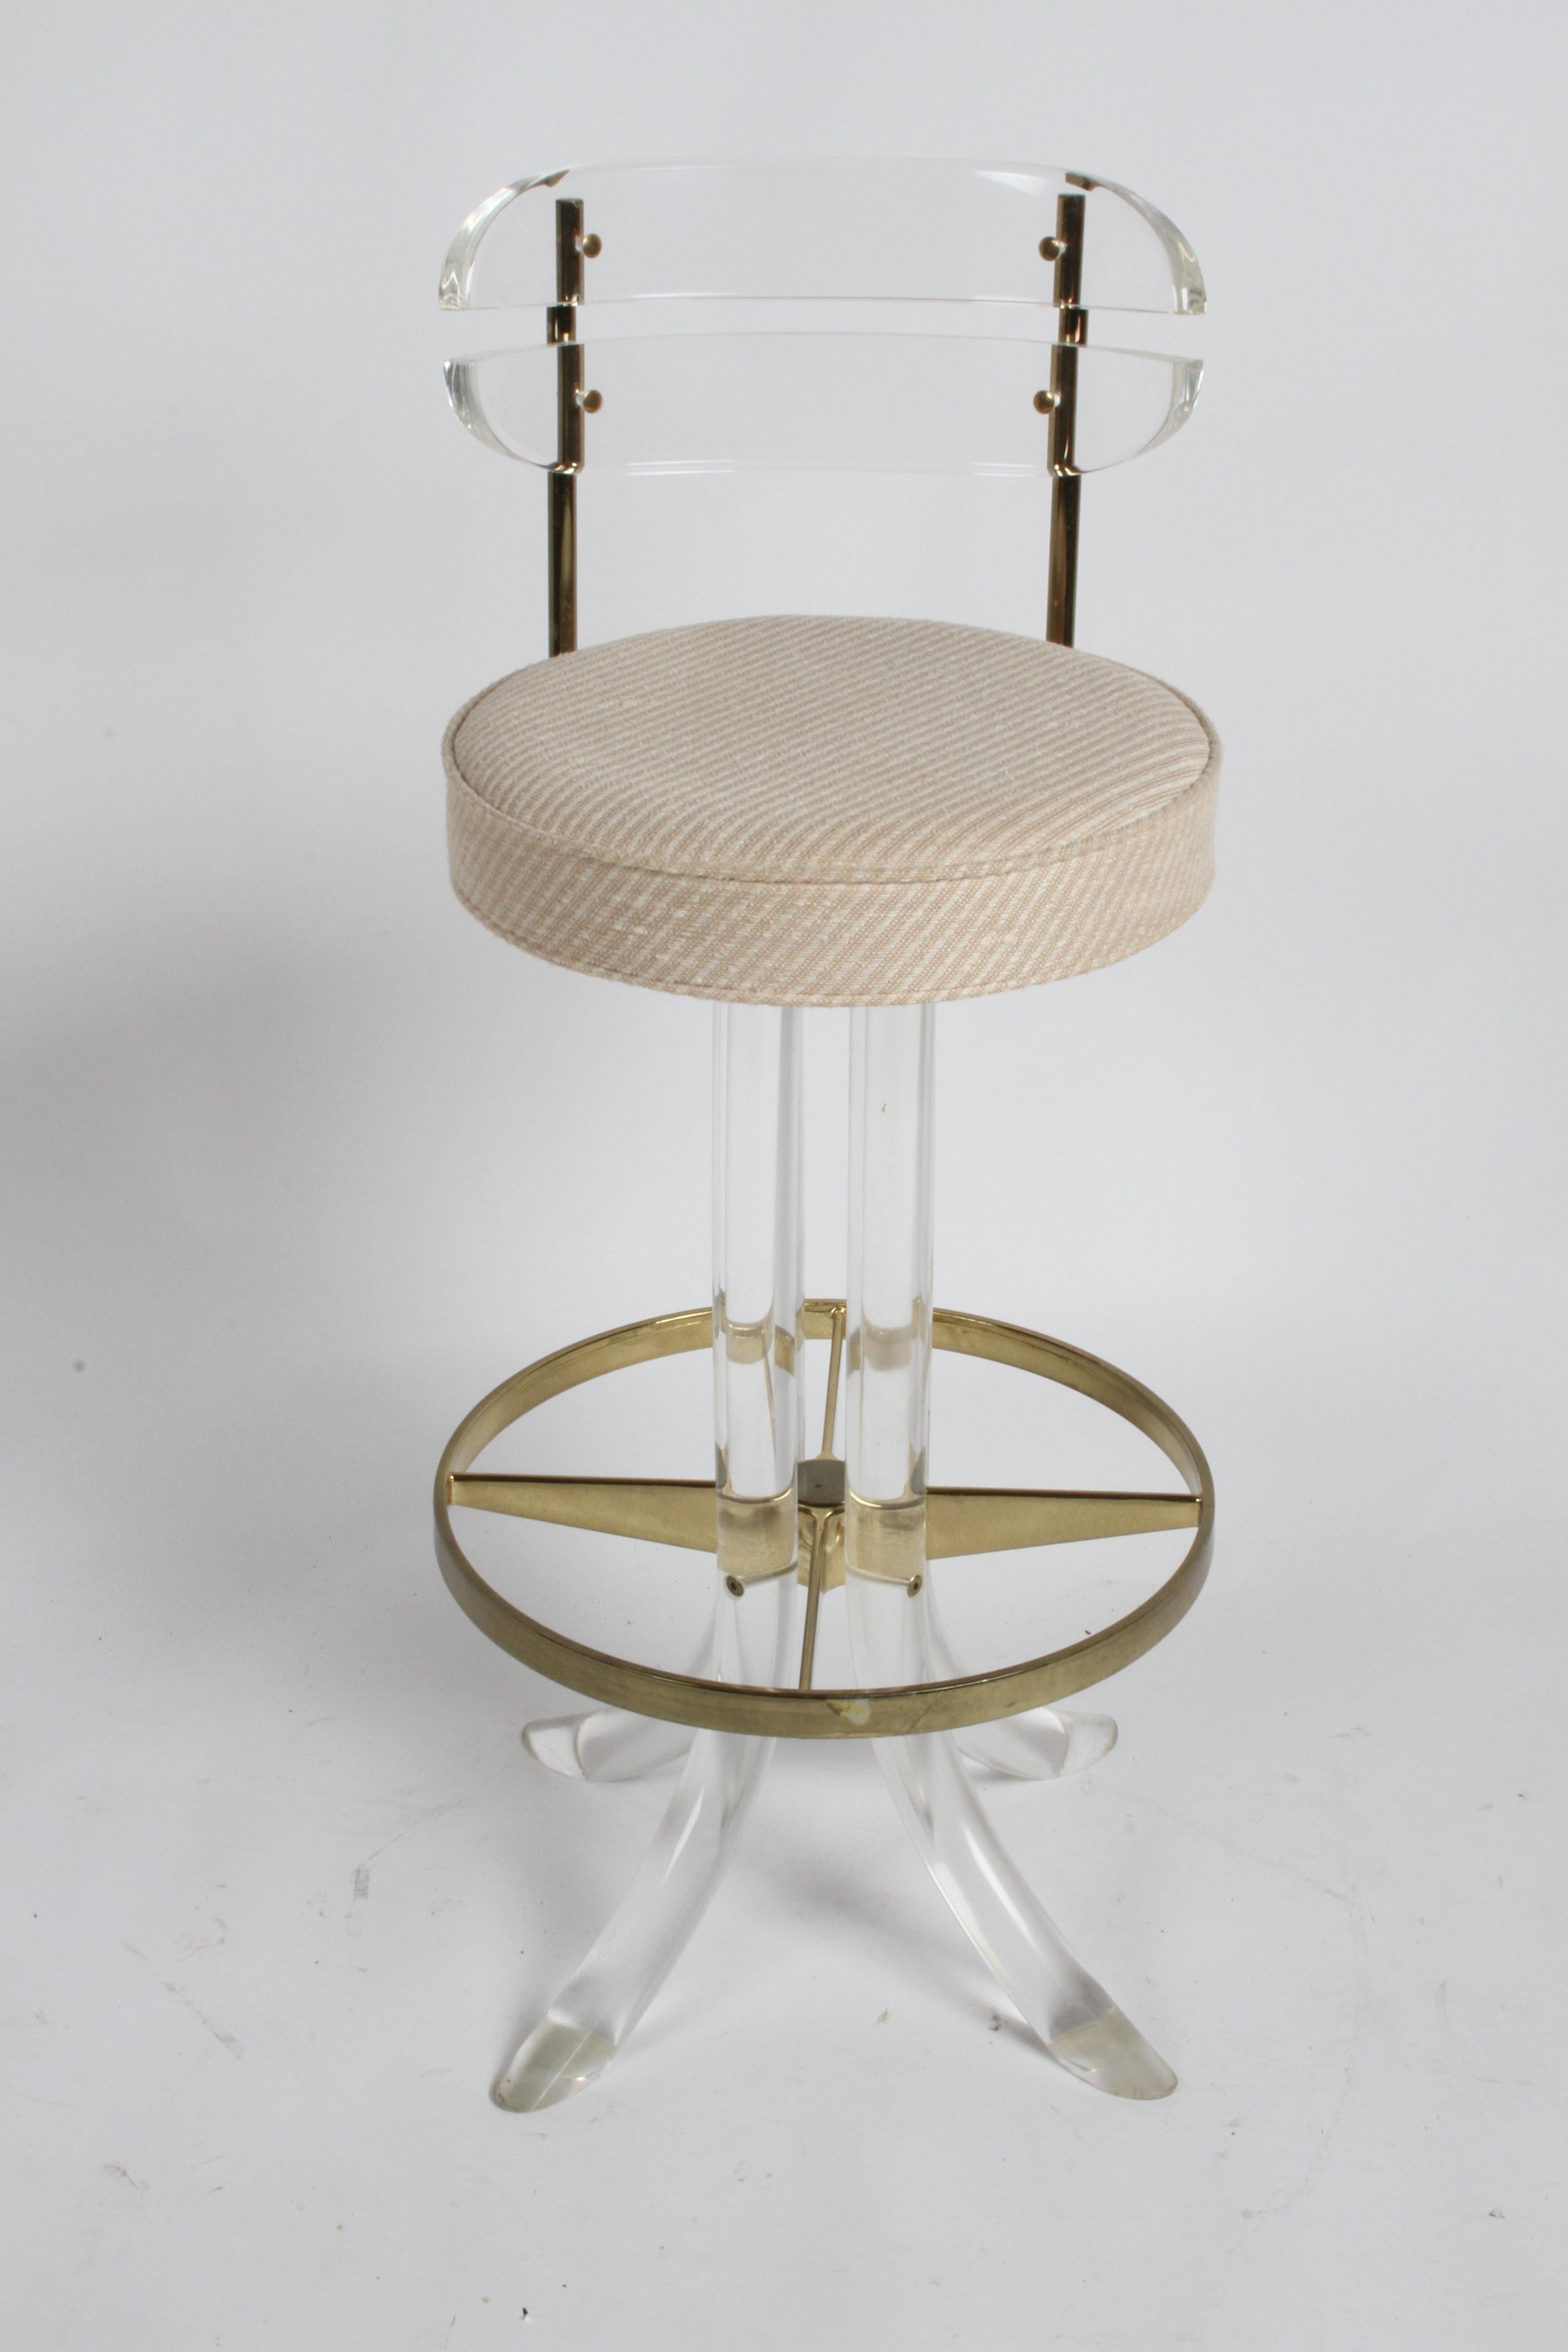 Beautiful set of three 1970s Hollywood Regency Lucite and brass bar stools with backs, foot rest and swivel by Hill Manufacturing Corp of New York. Original salmon and creme upholstery in fine condition, on thick round Lucite splayed legs. Brass and